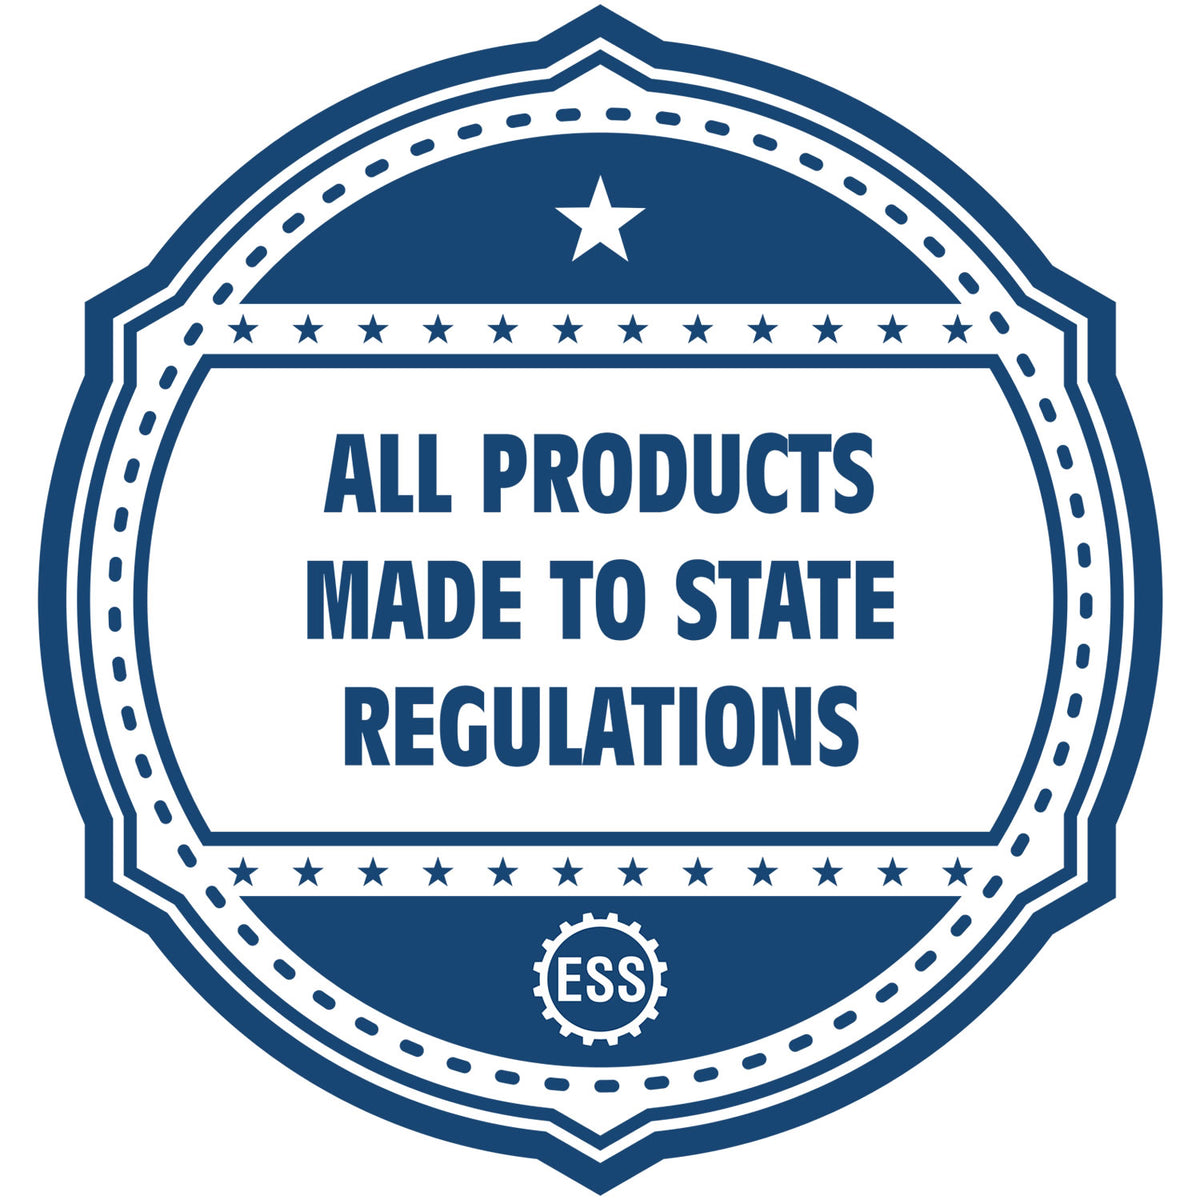 An icon or badge element for the State of West Virginia Architectural Seal Embosser showing that this product is made in compliance with state regulations.